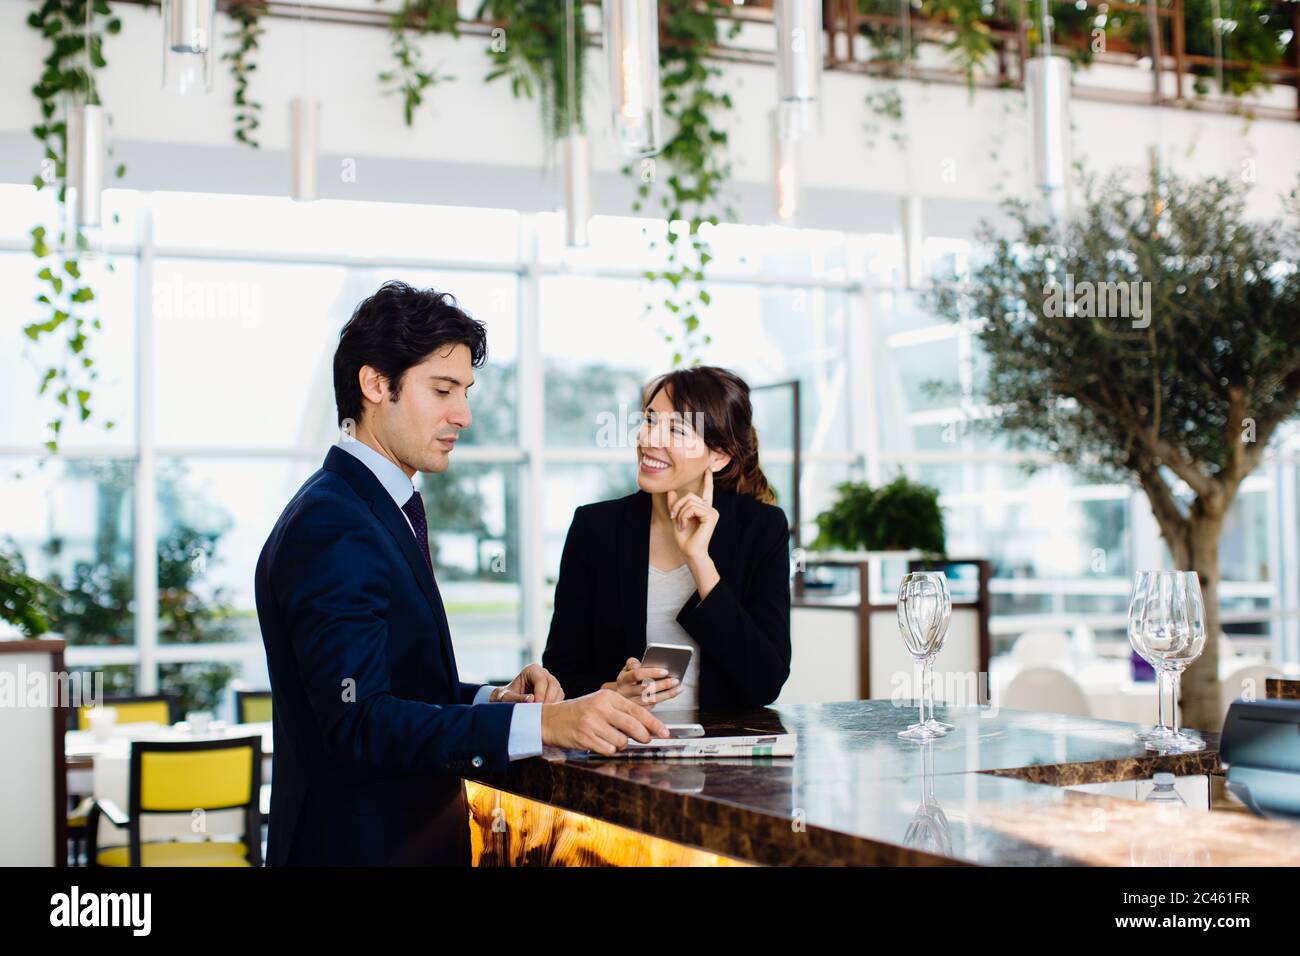 Businessman and businesswoman having drink at bar Stock Photo